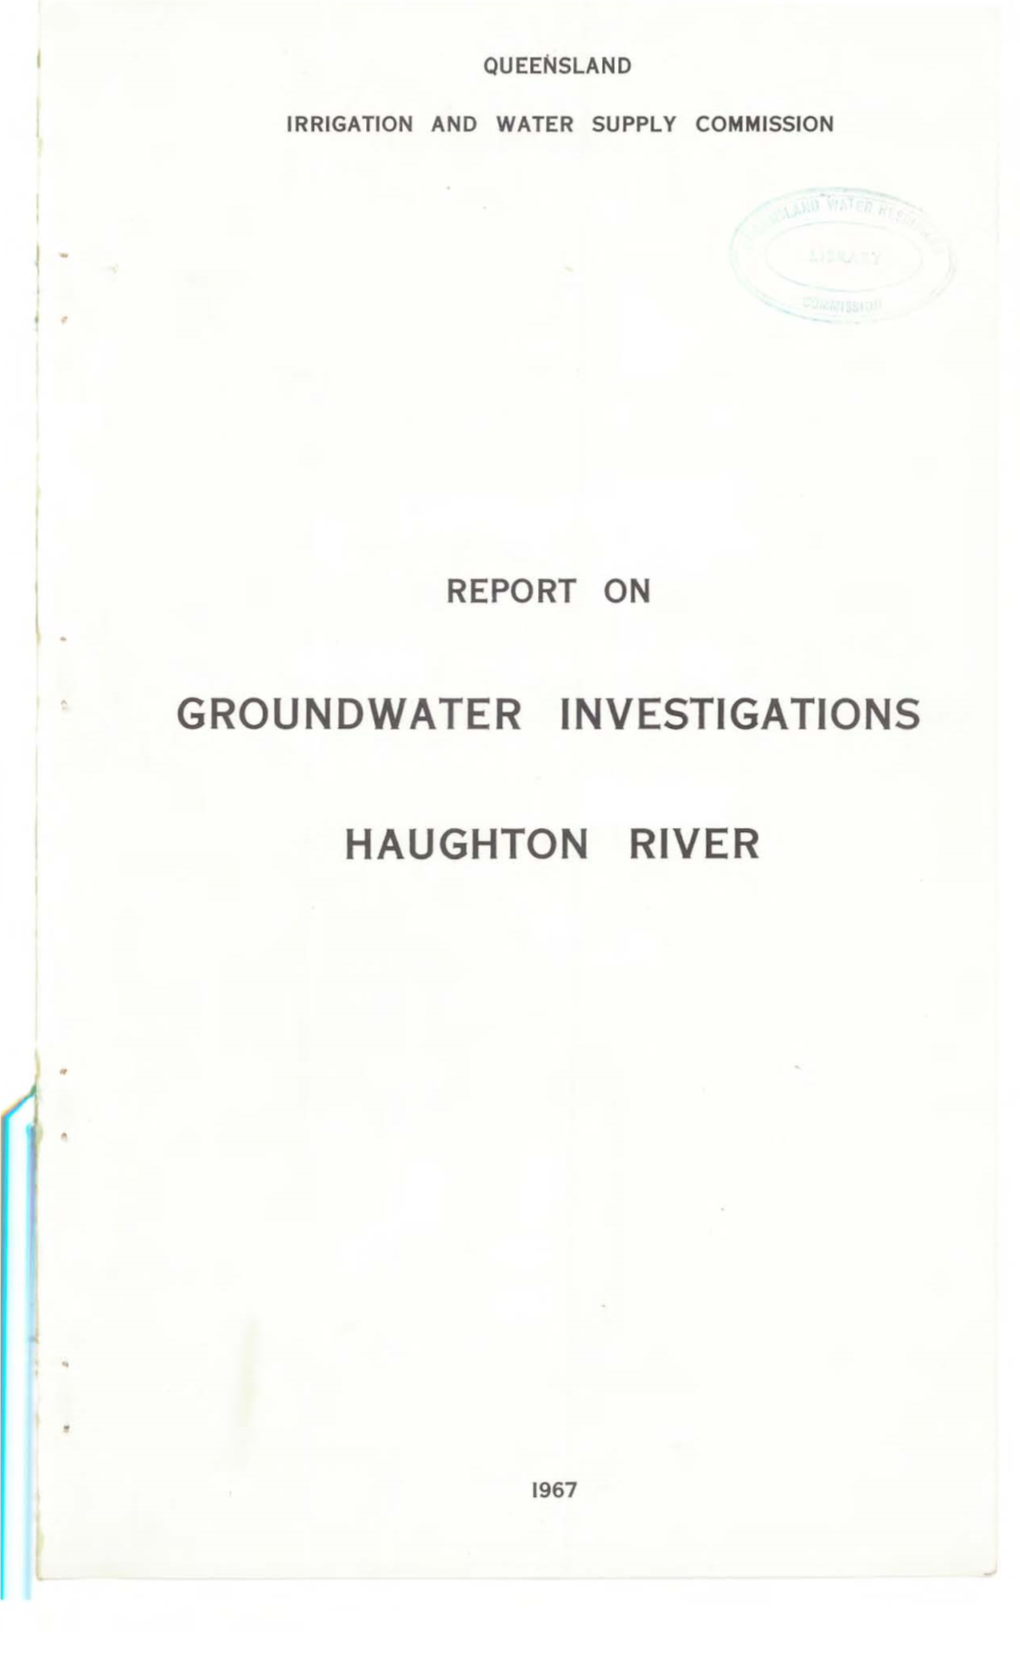 Groundwater Investigations Haughton River